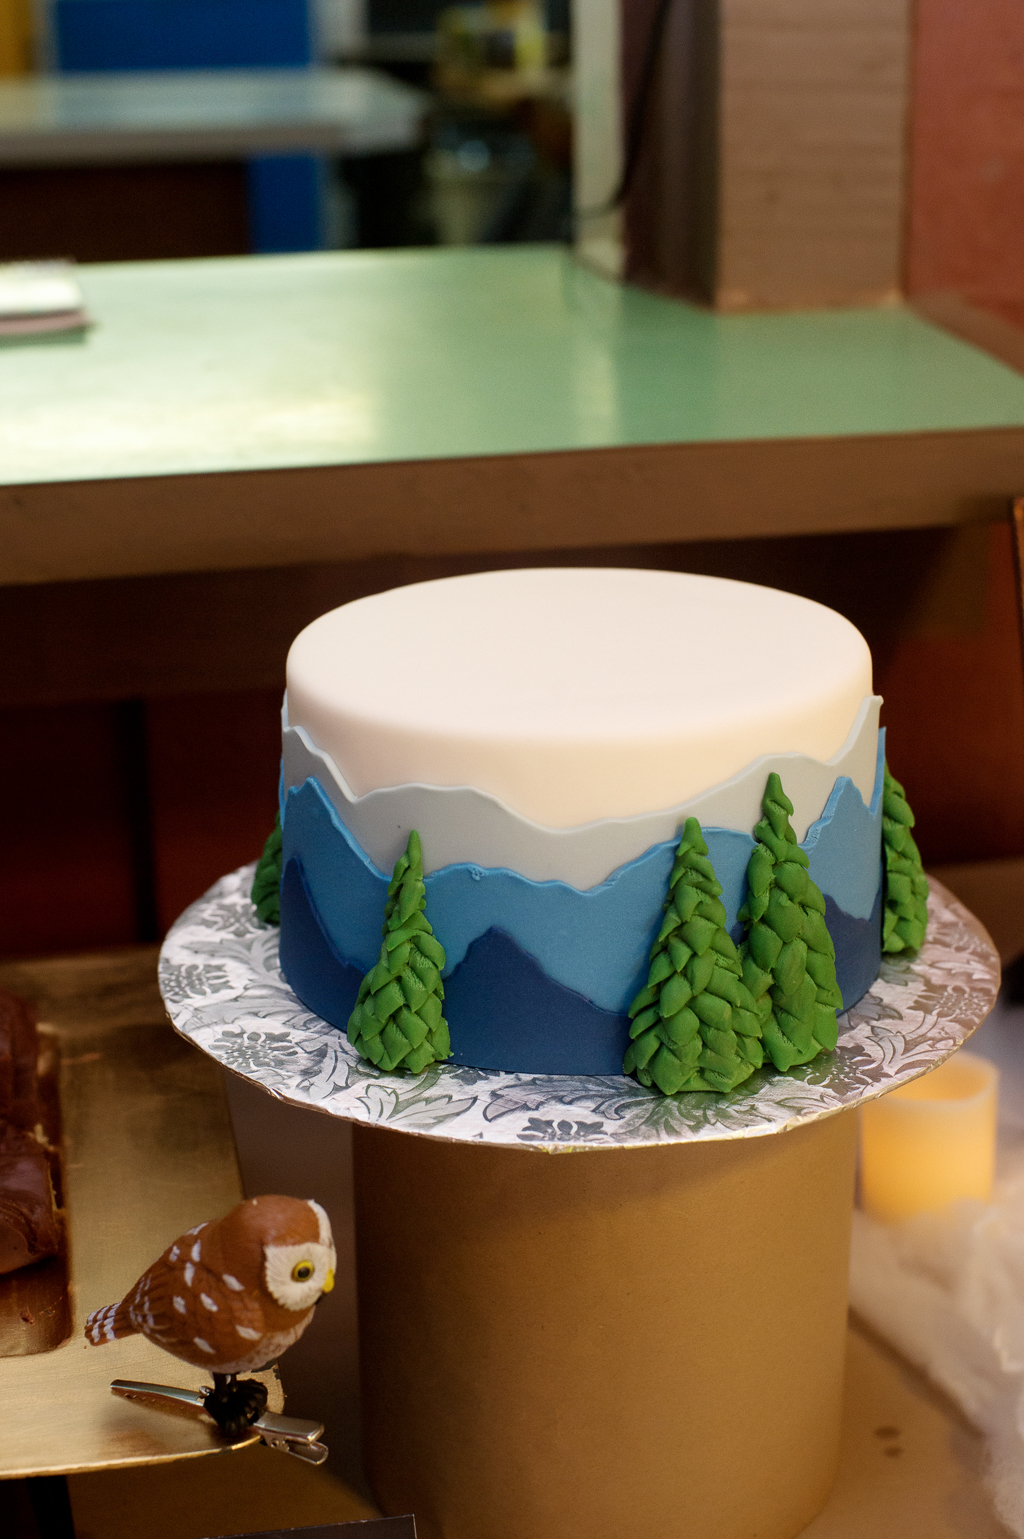 a wedding cake with a mountain scene and trees